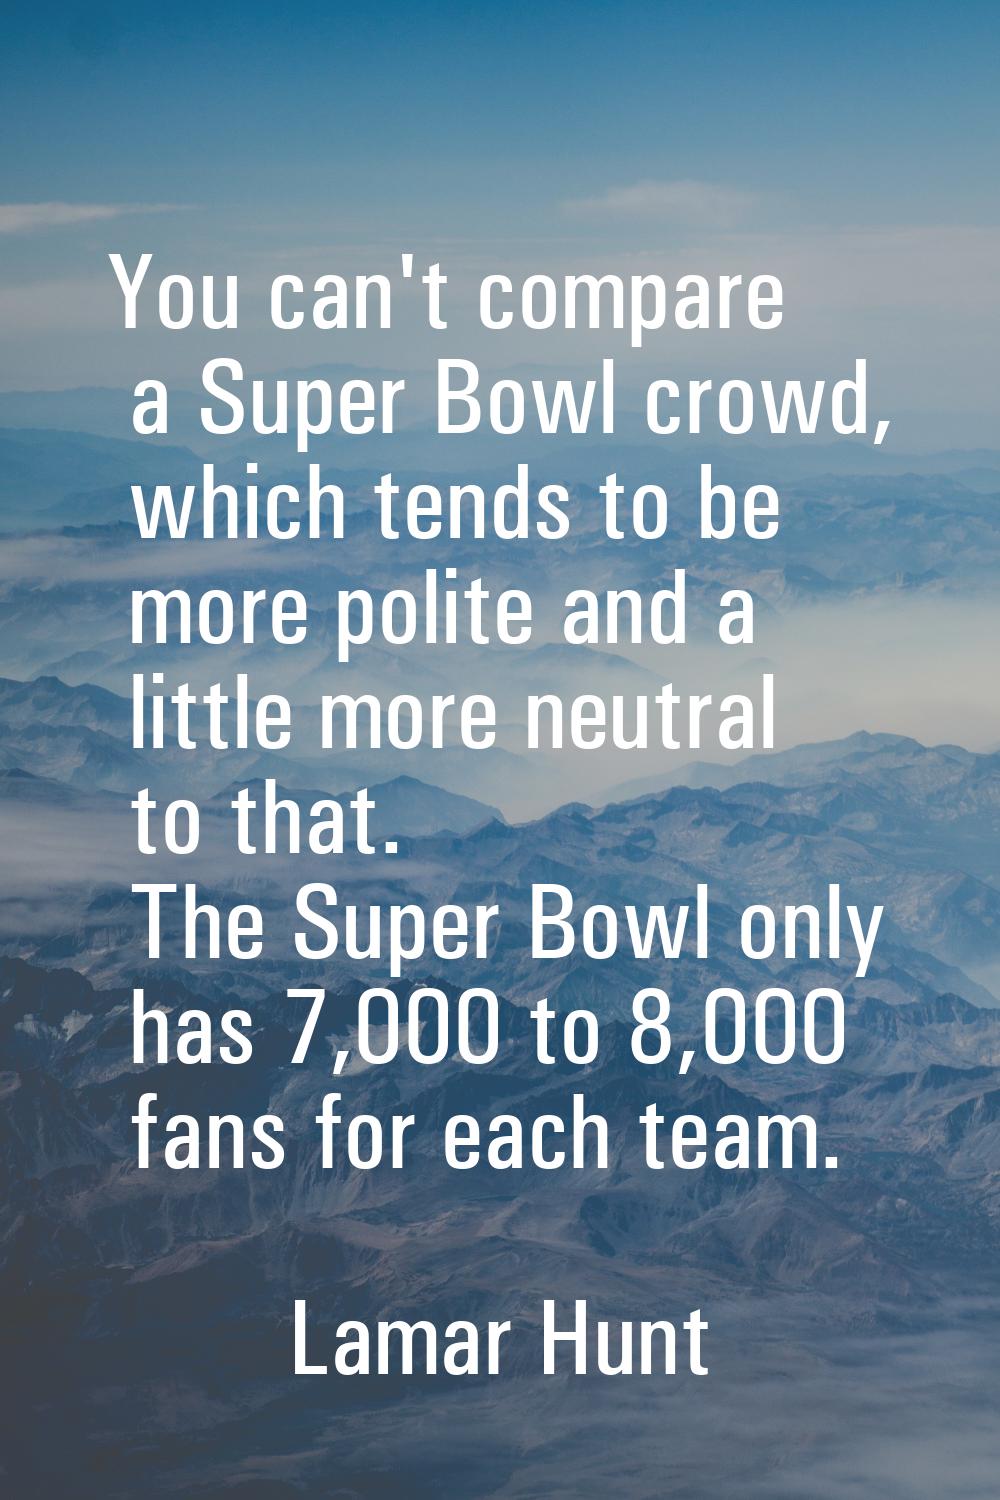 You can't compare a Super Bowl crowd, which tends to be more polite and a little more neutral to th